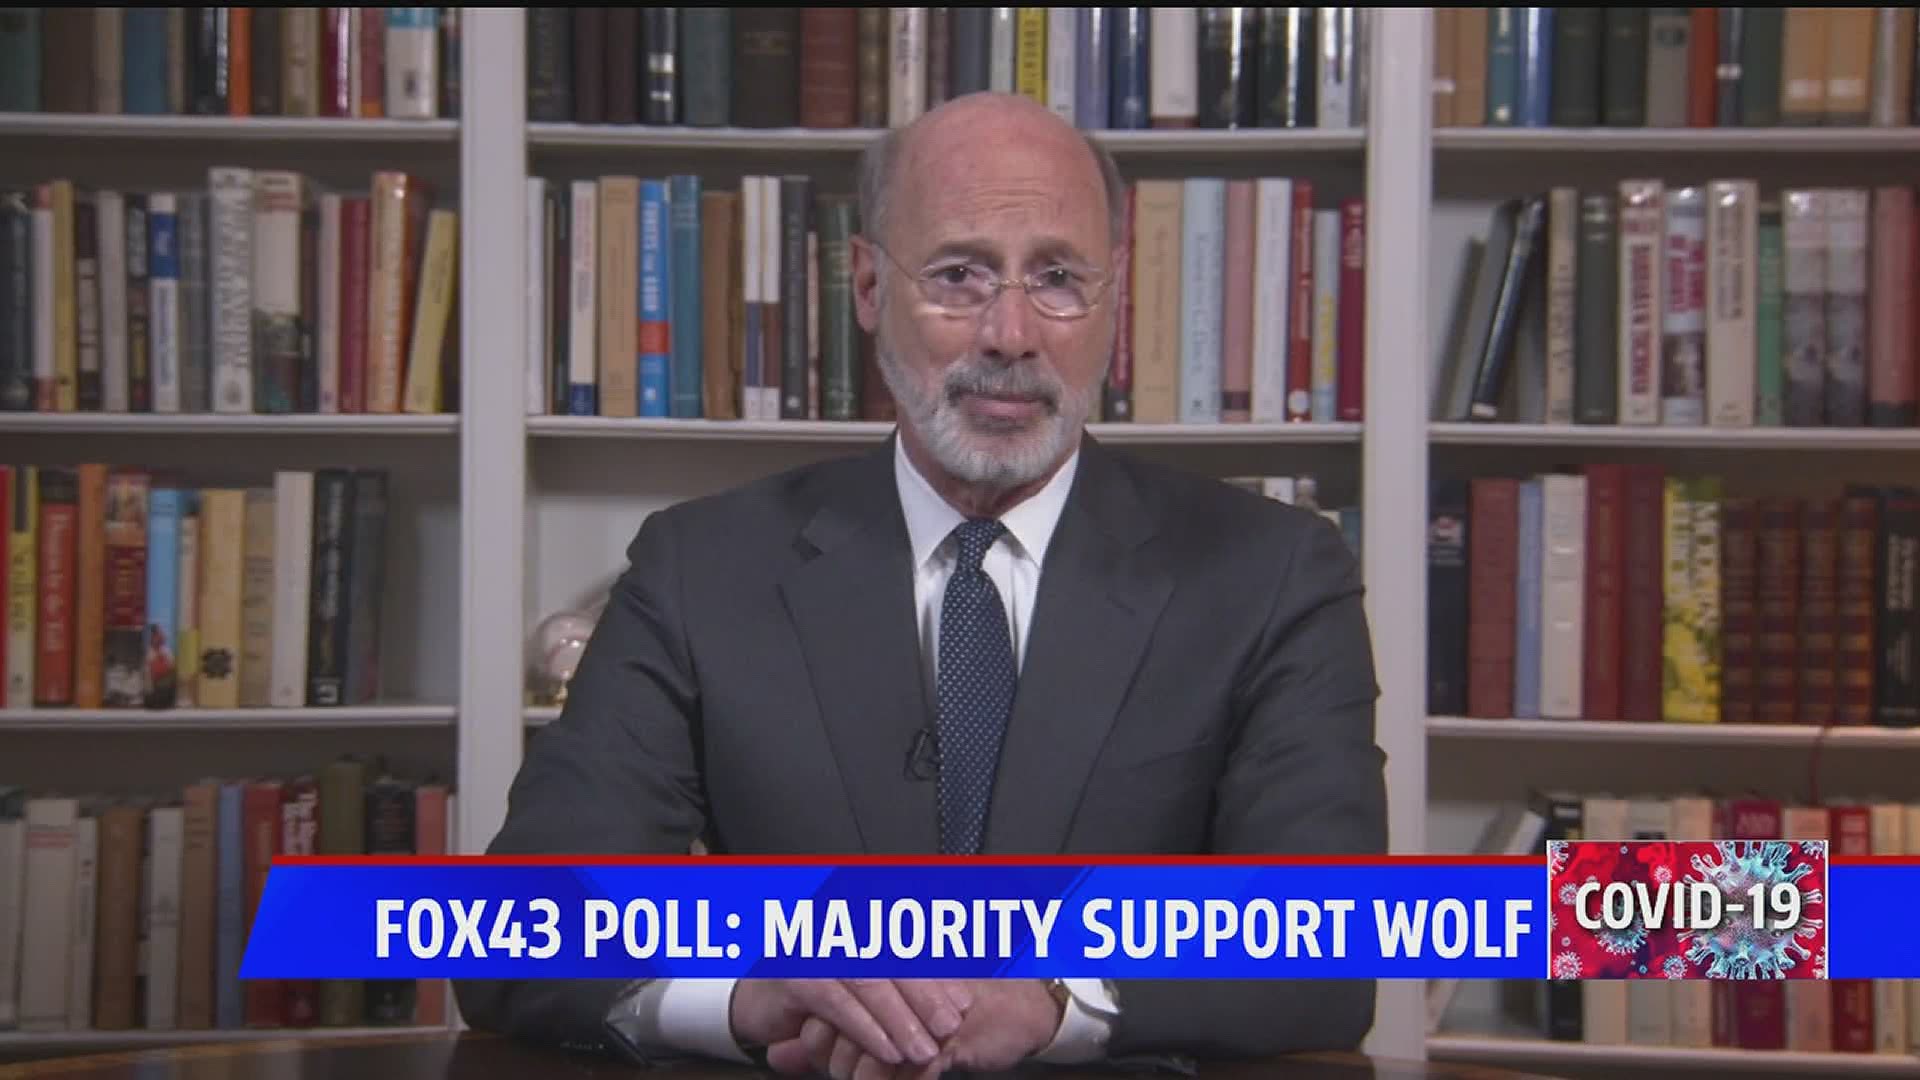 More than two-thirds of Pennsylvanians polled statewide say they think Governor Tom Wolf is doing a good job managing the COVID-19 pandemic.